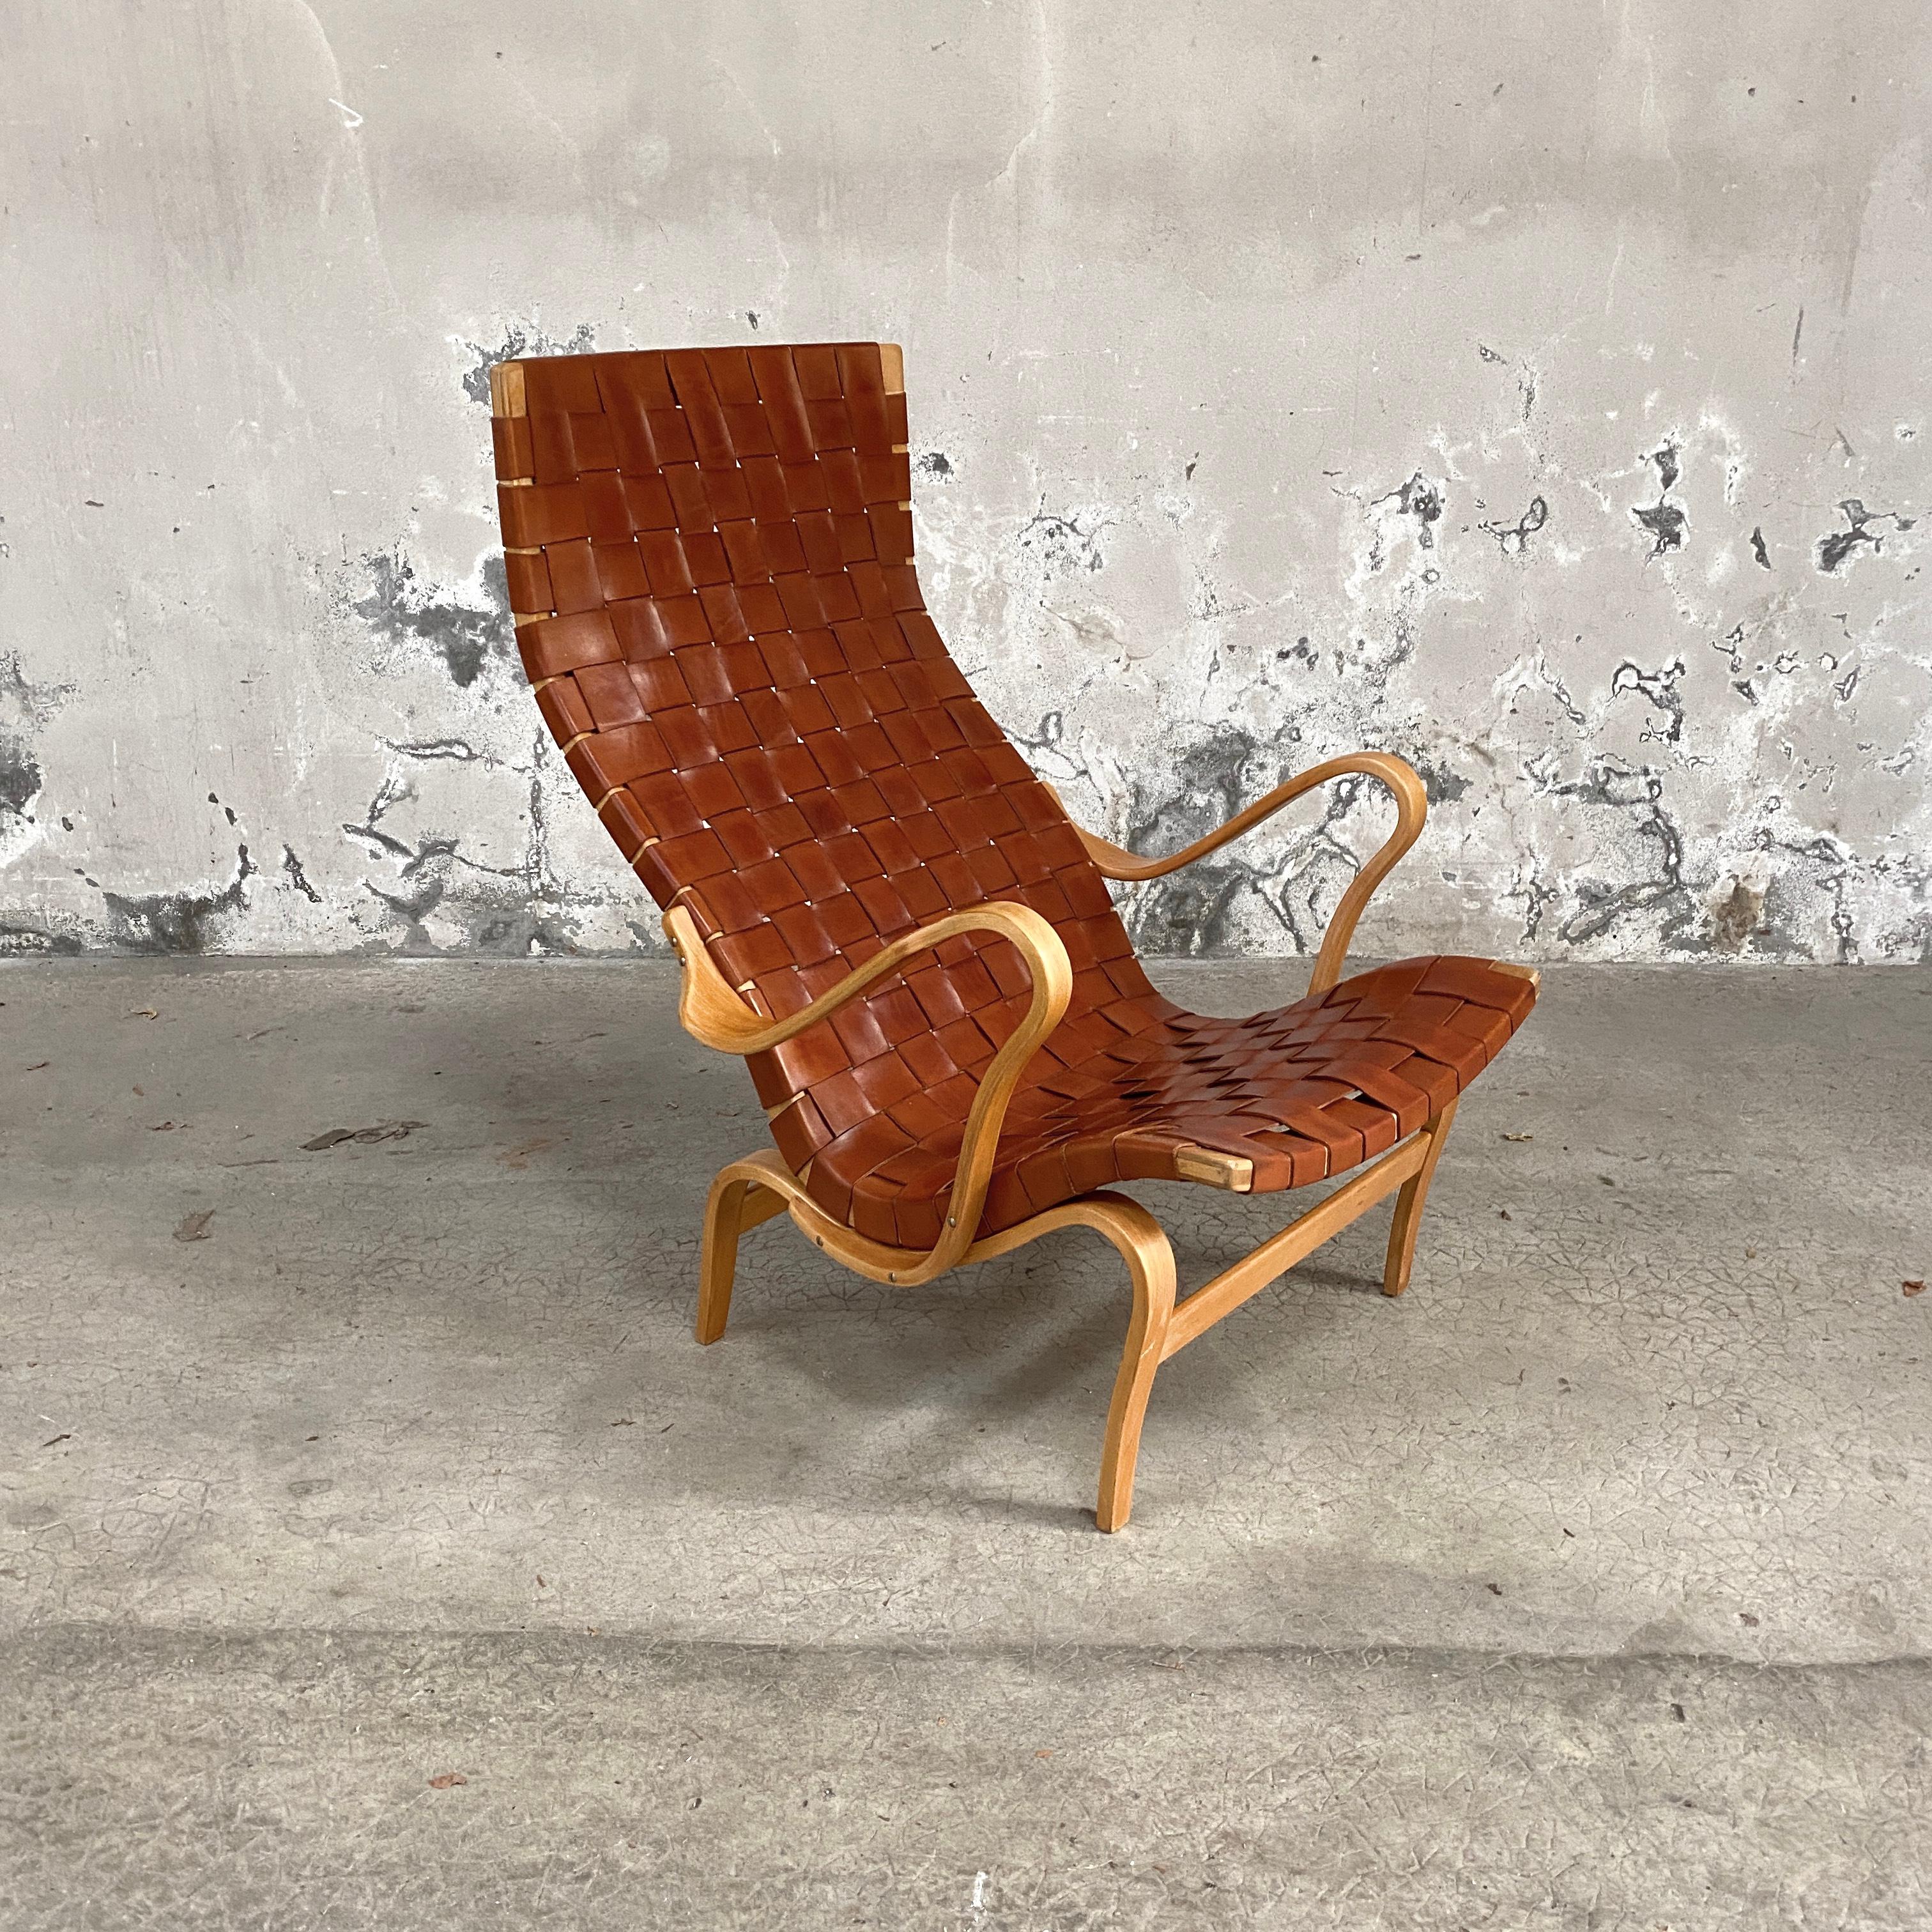 Design by Bruno Mathsson for DUX easy chair with leather straps and signed.

Very beautiful patina of leather, magnificent woodwork.